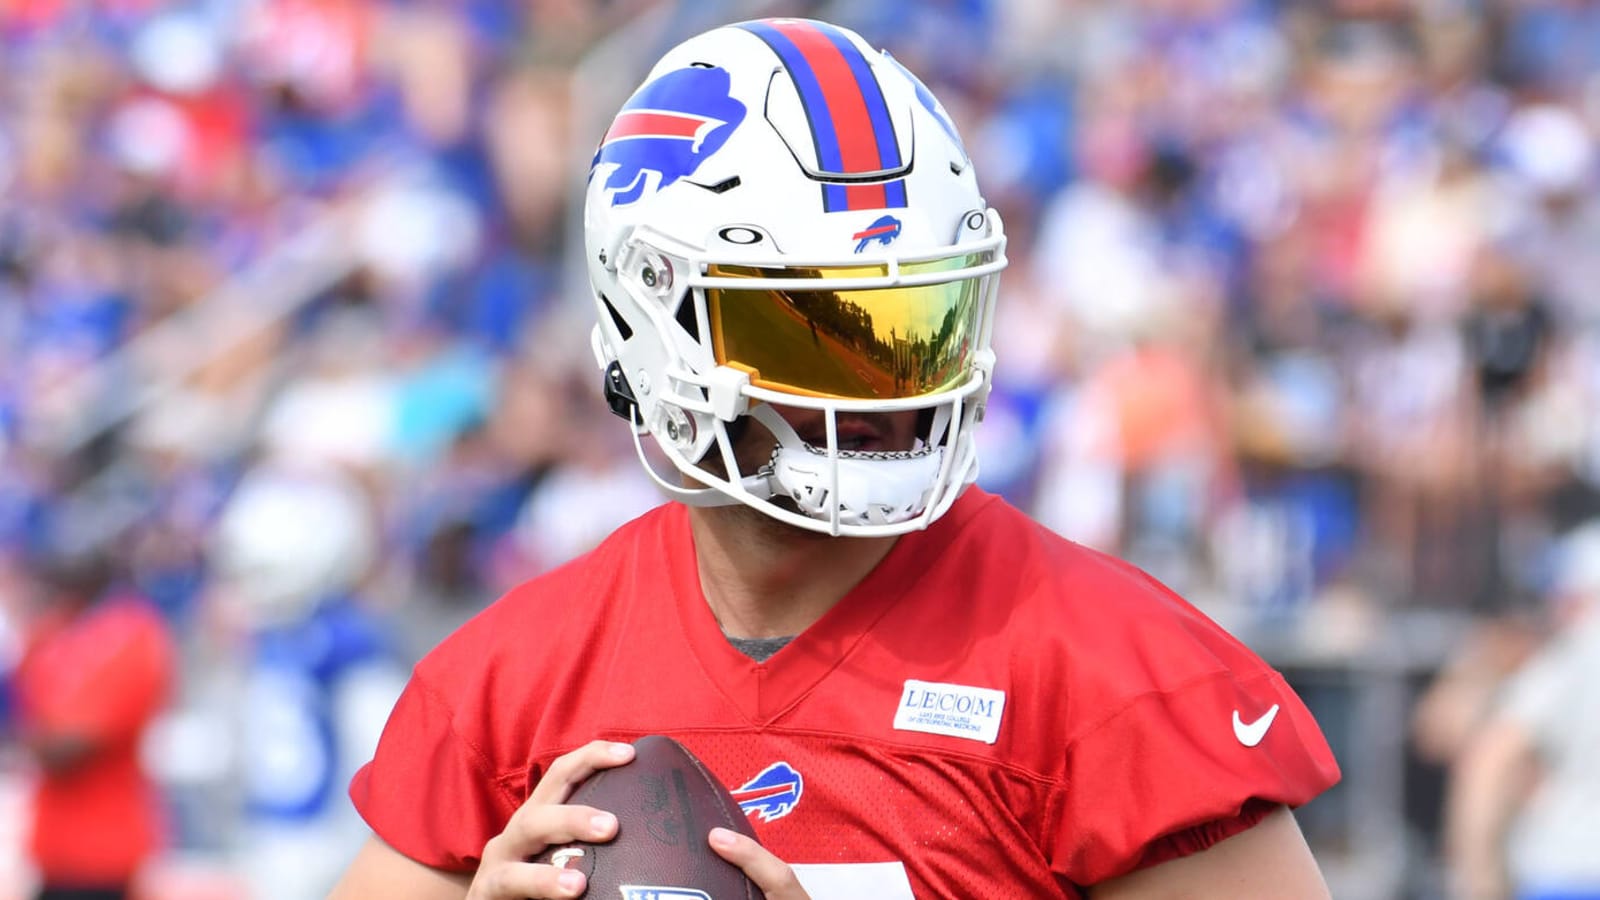 Josh Allen sparks practice scuffle after being contacted by defender